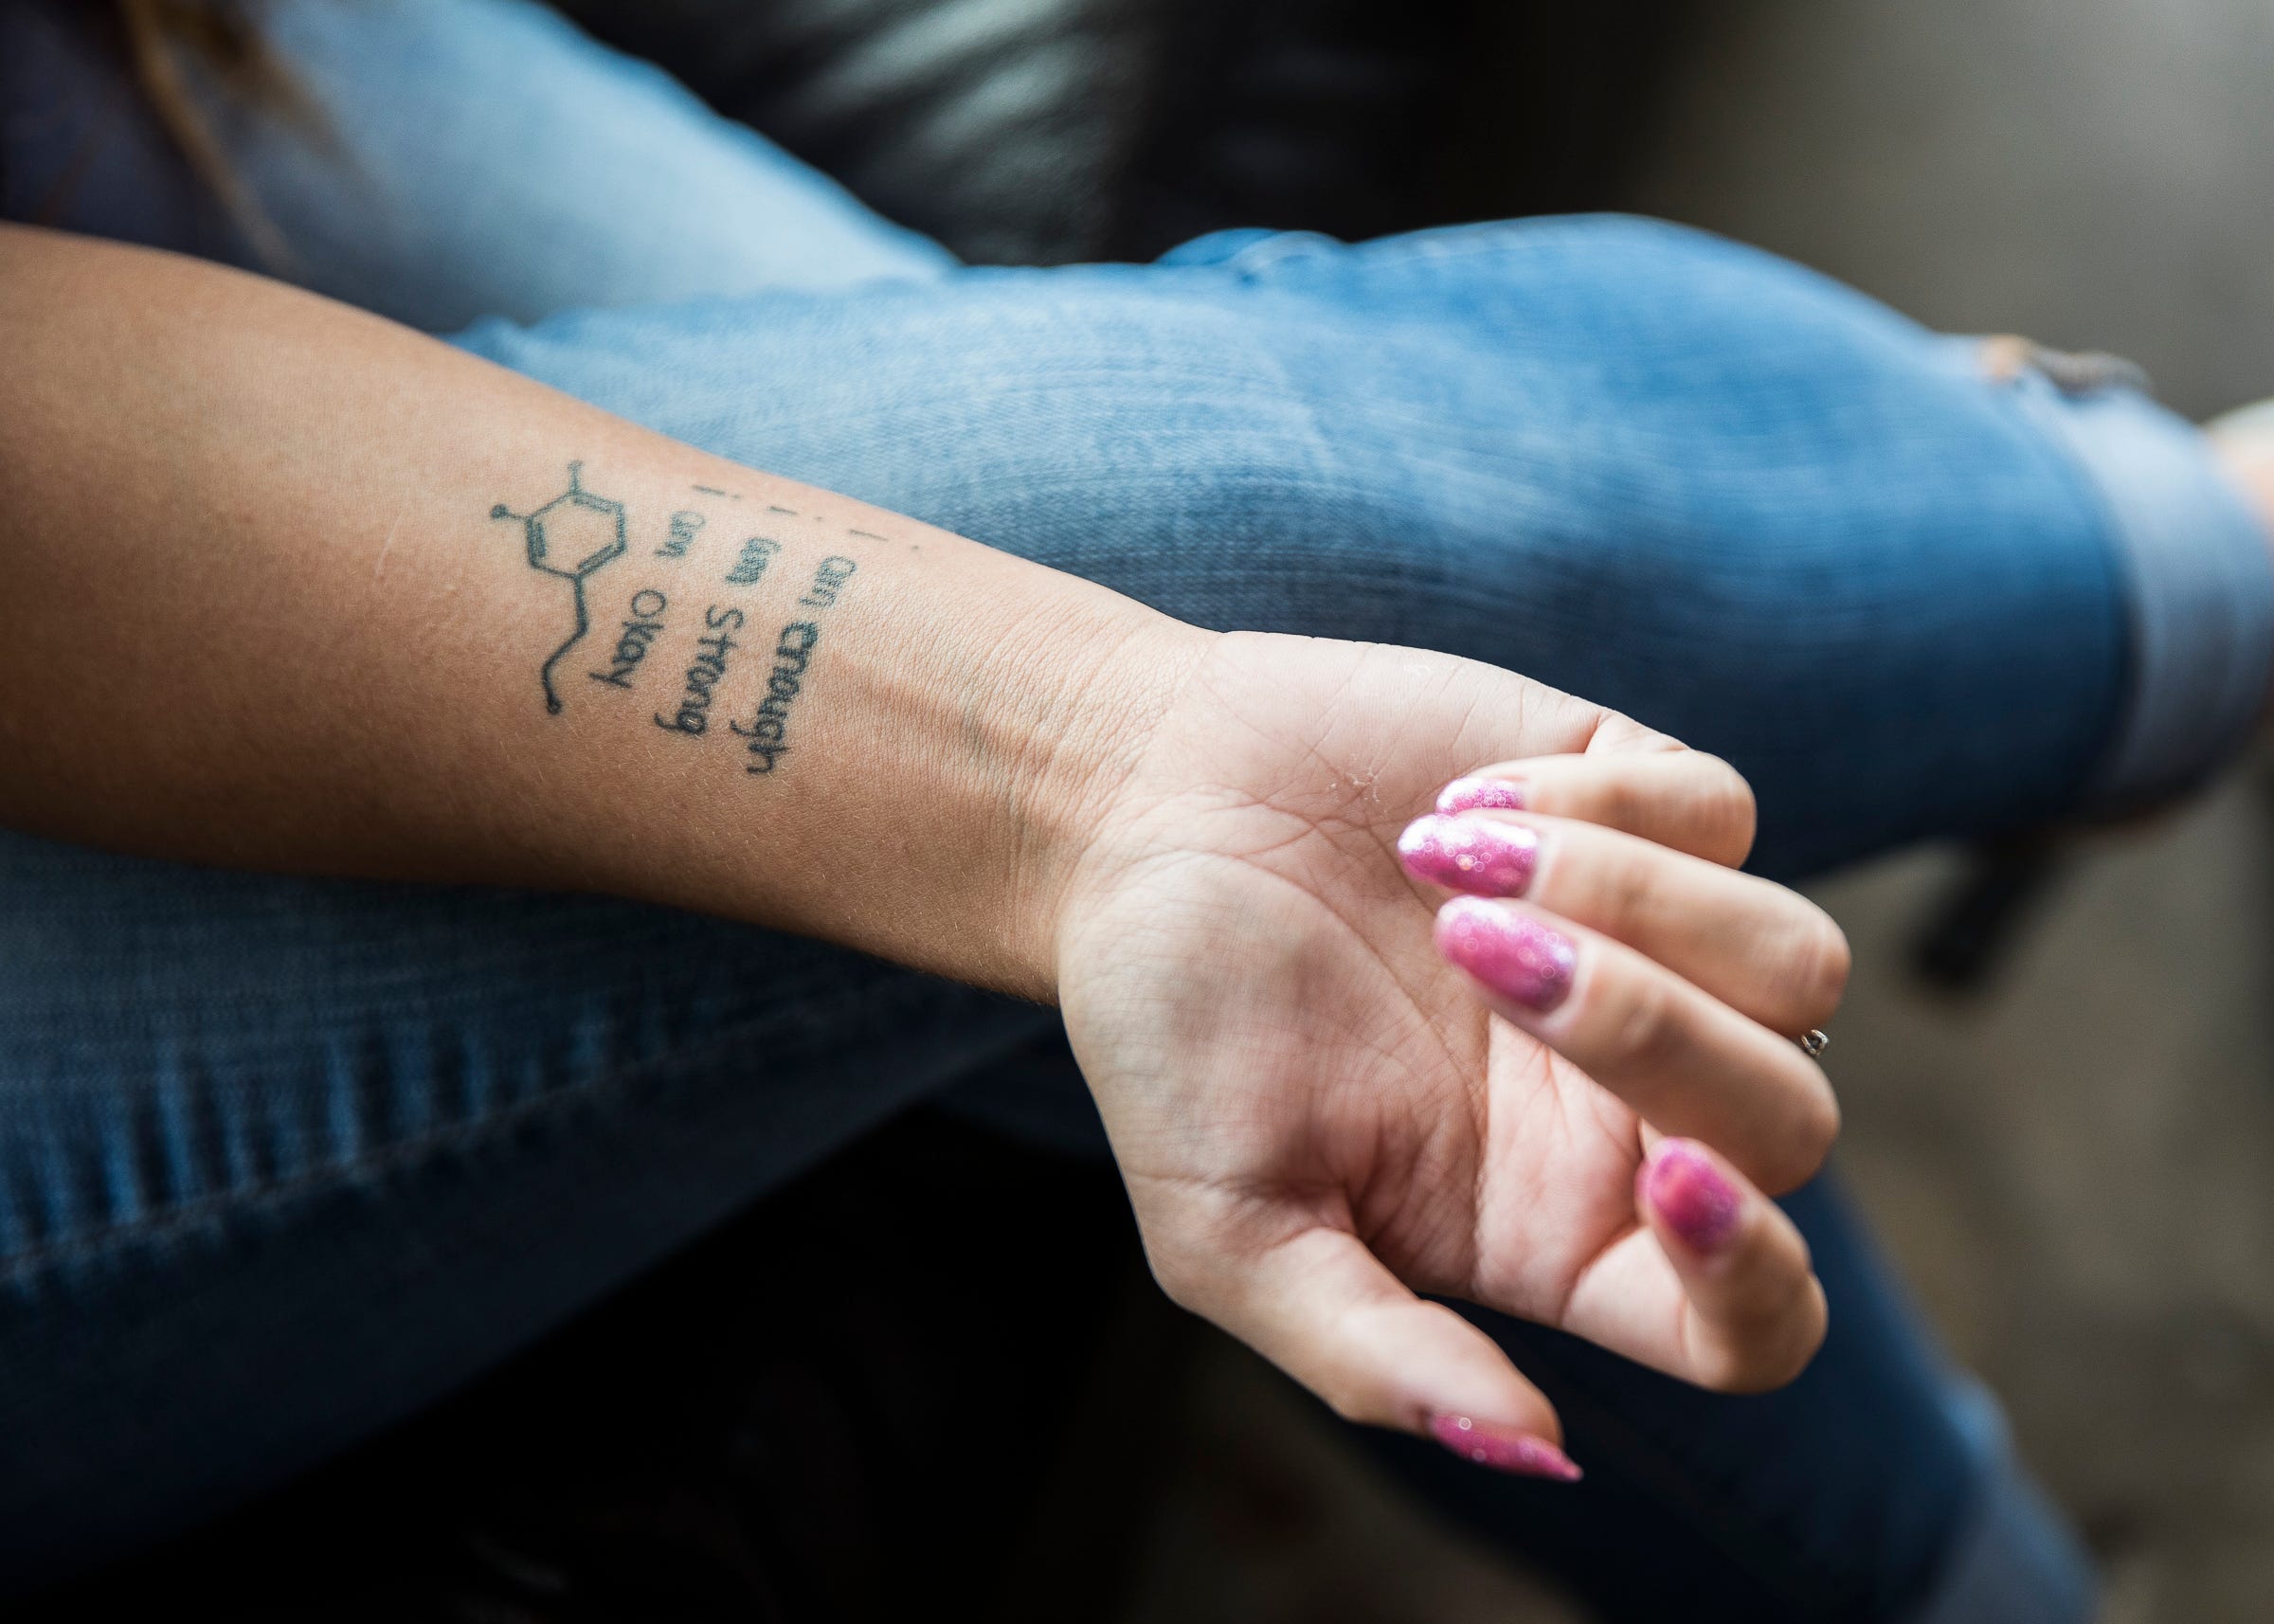 Depression Tattoos to Support Mental Health